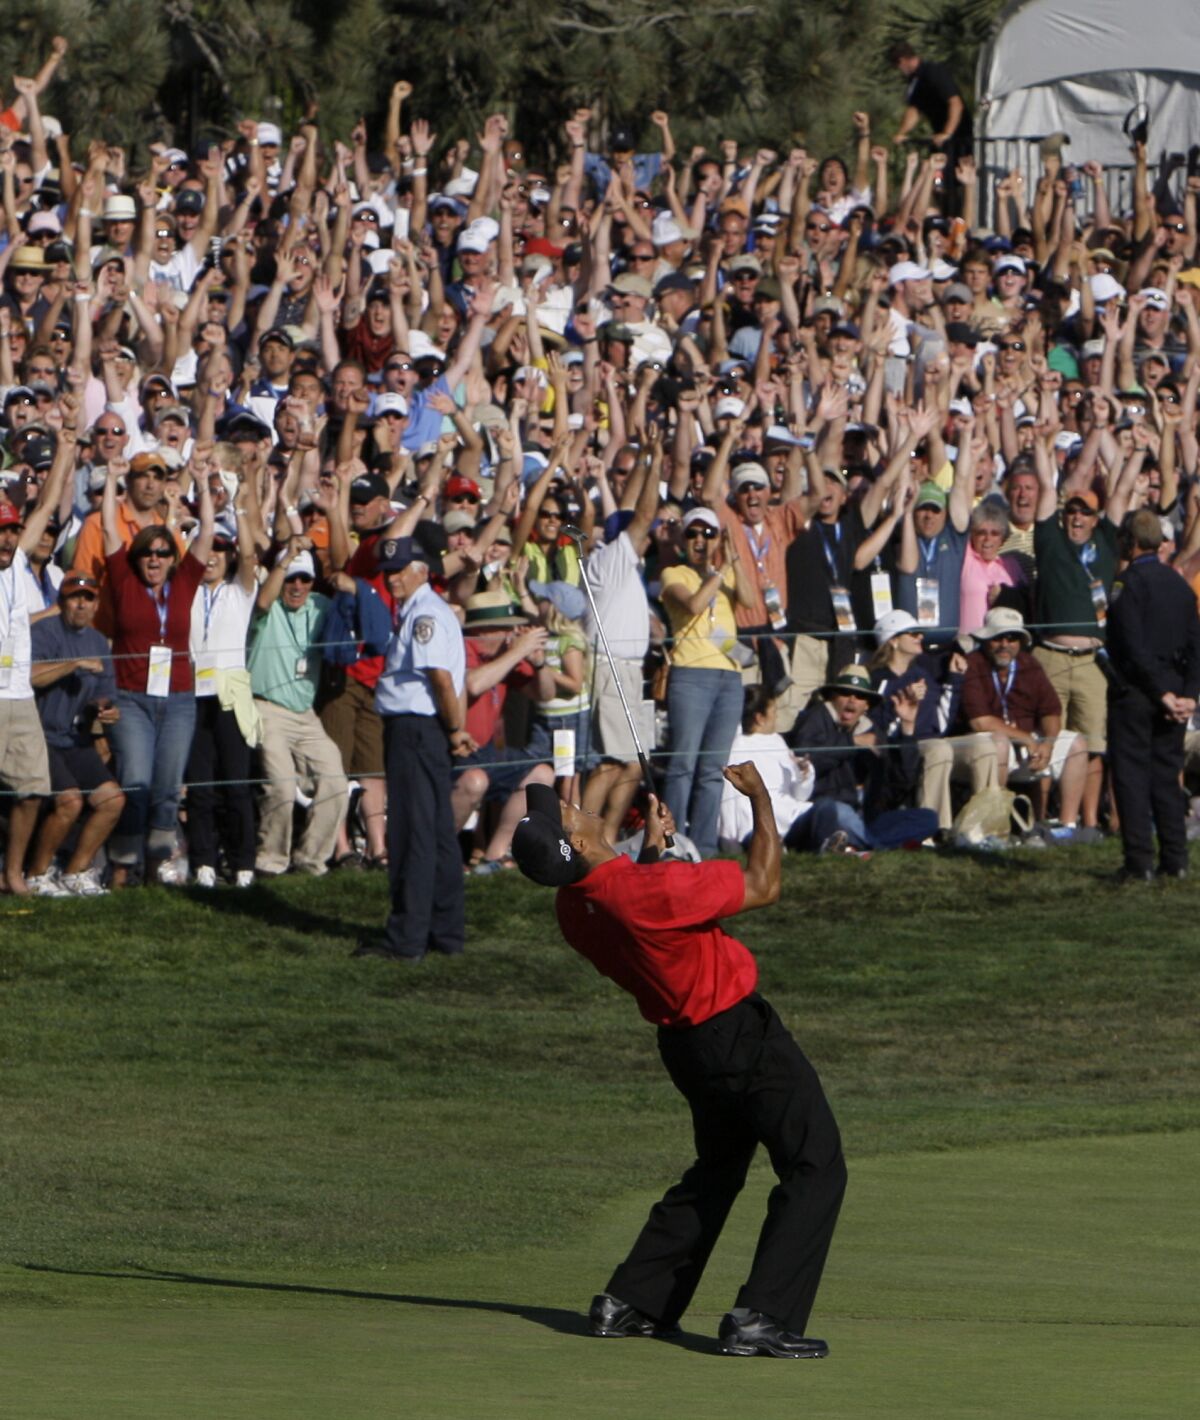 Tiger Woods exults after forcing a playoff against Rocco Mediate during the U.S. Open at Torrey Pines Golf Course in 2008.